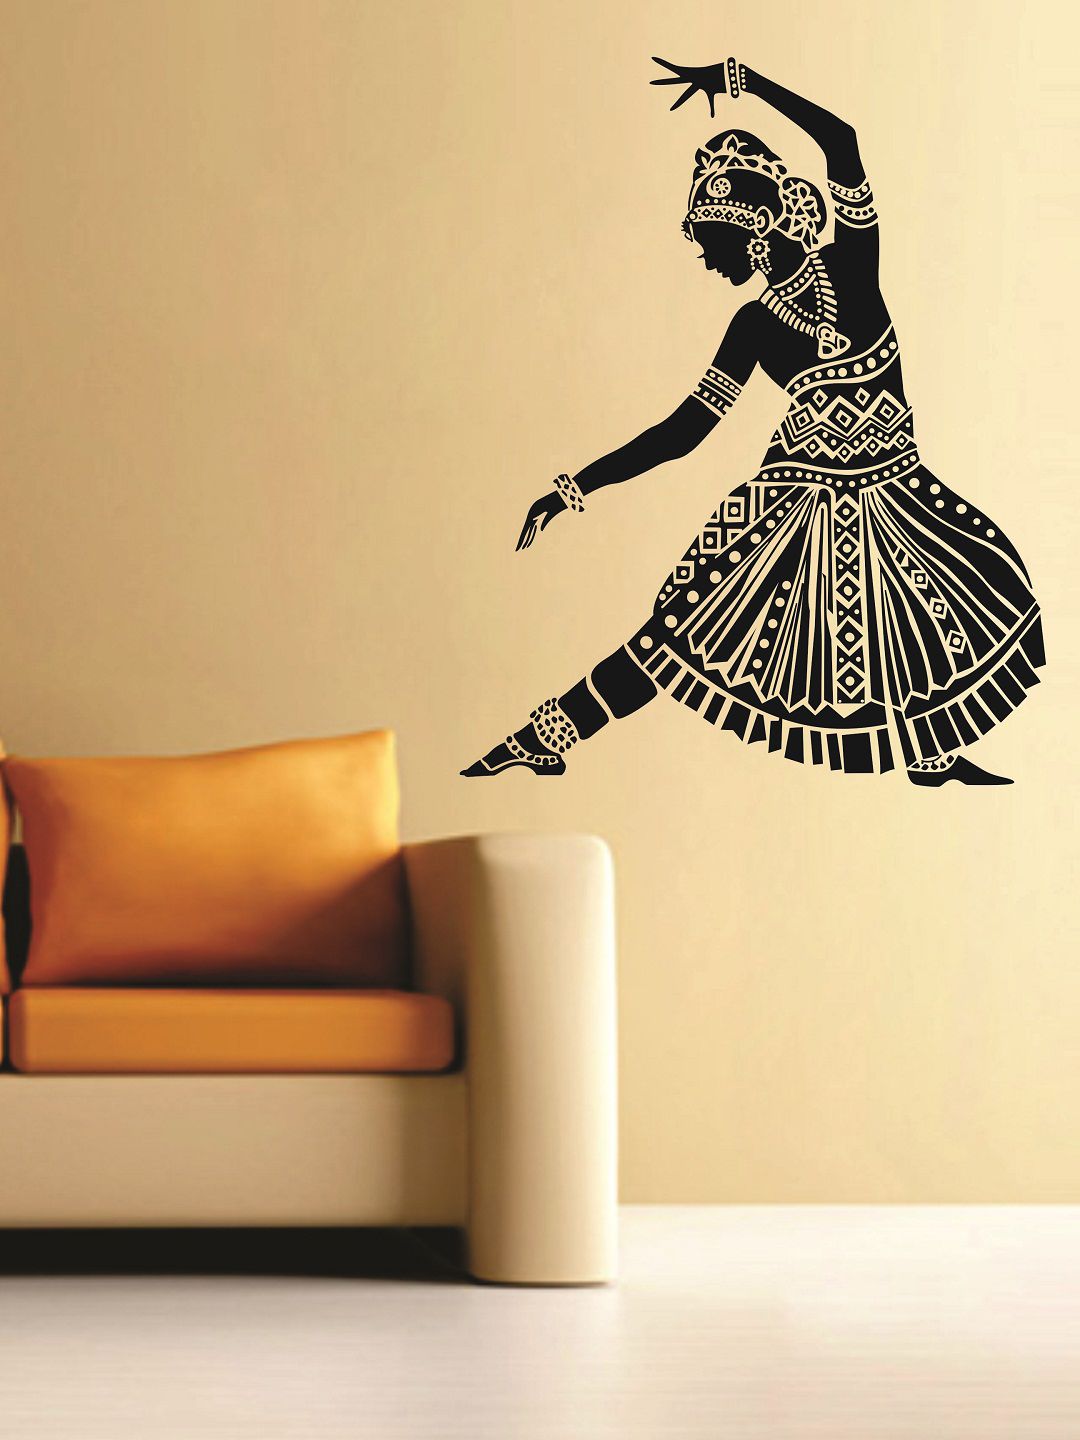 WALLSTICK Black Dancing Lady Large Vinyl Wall Sticker Price in India